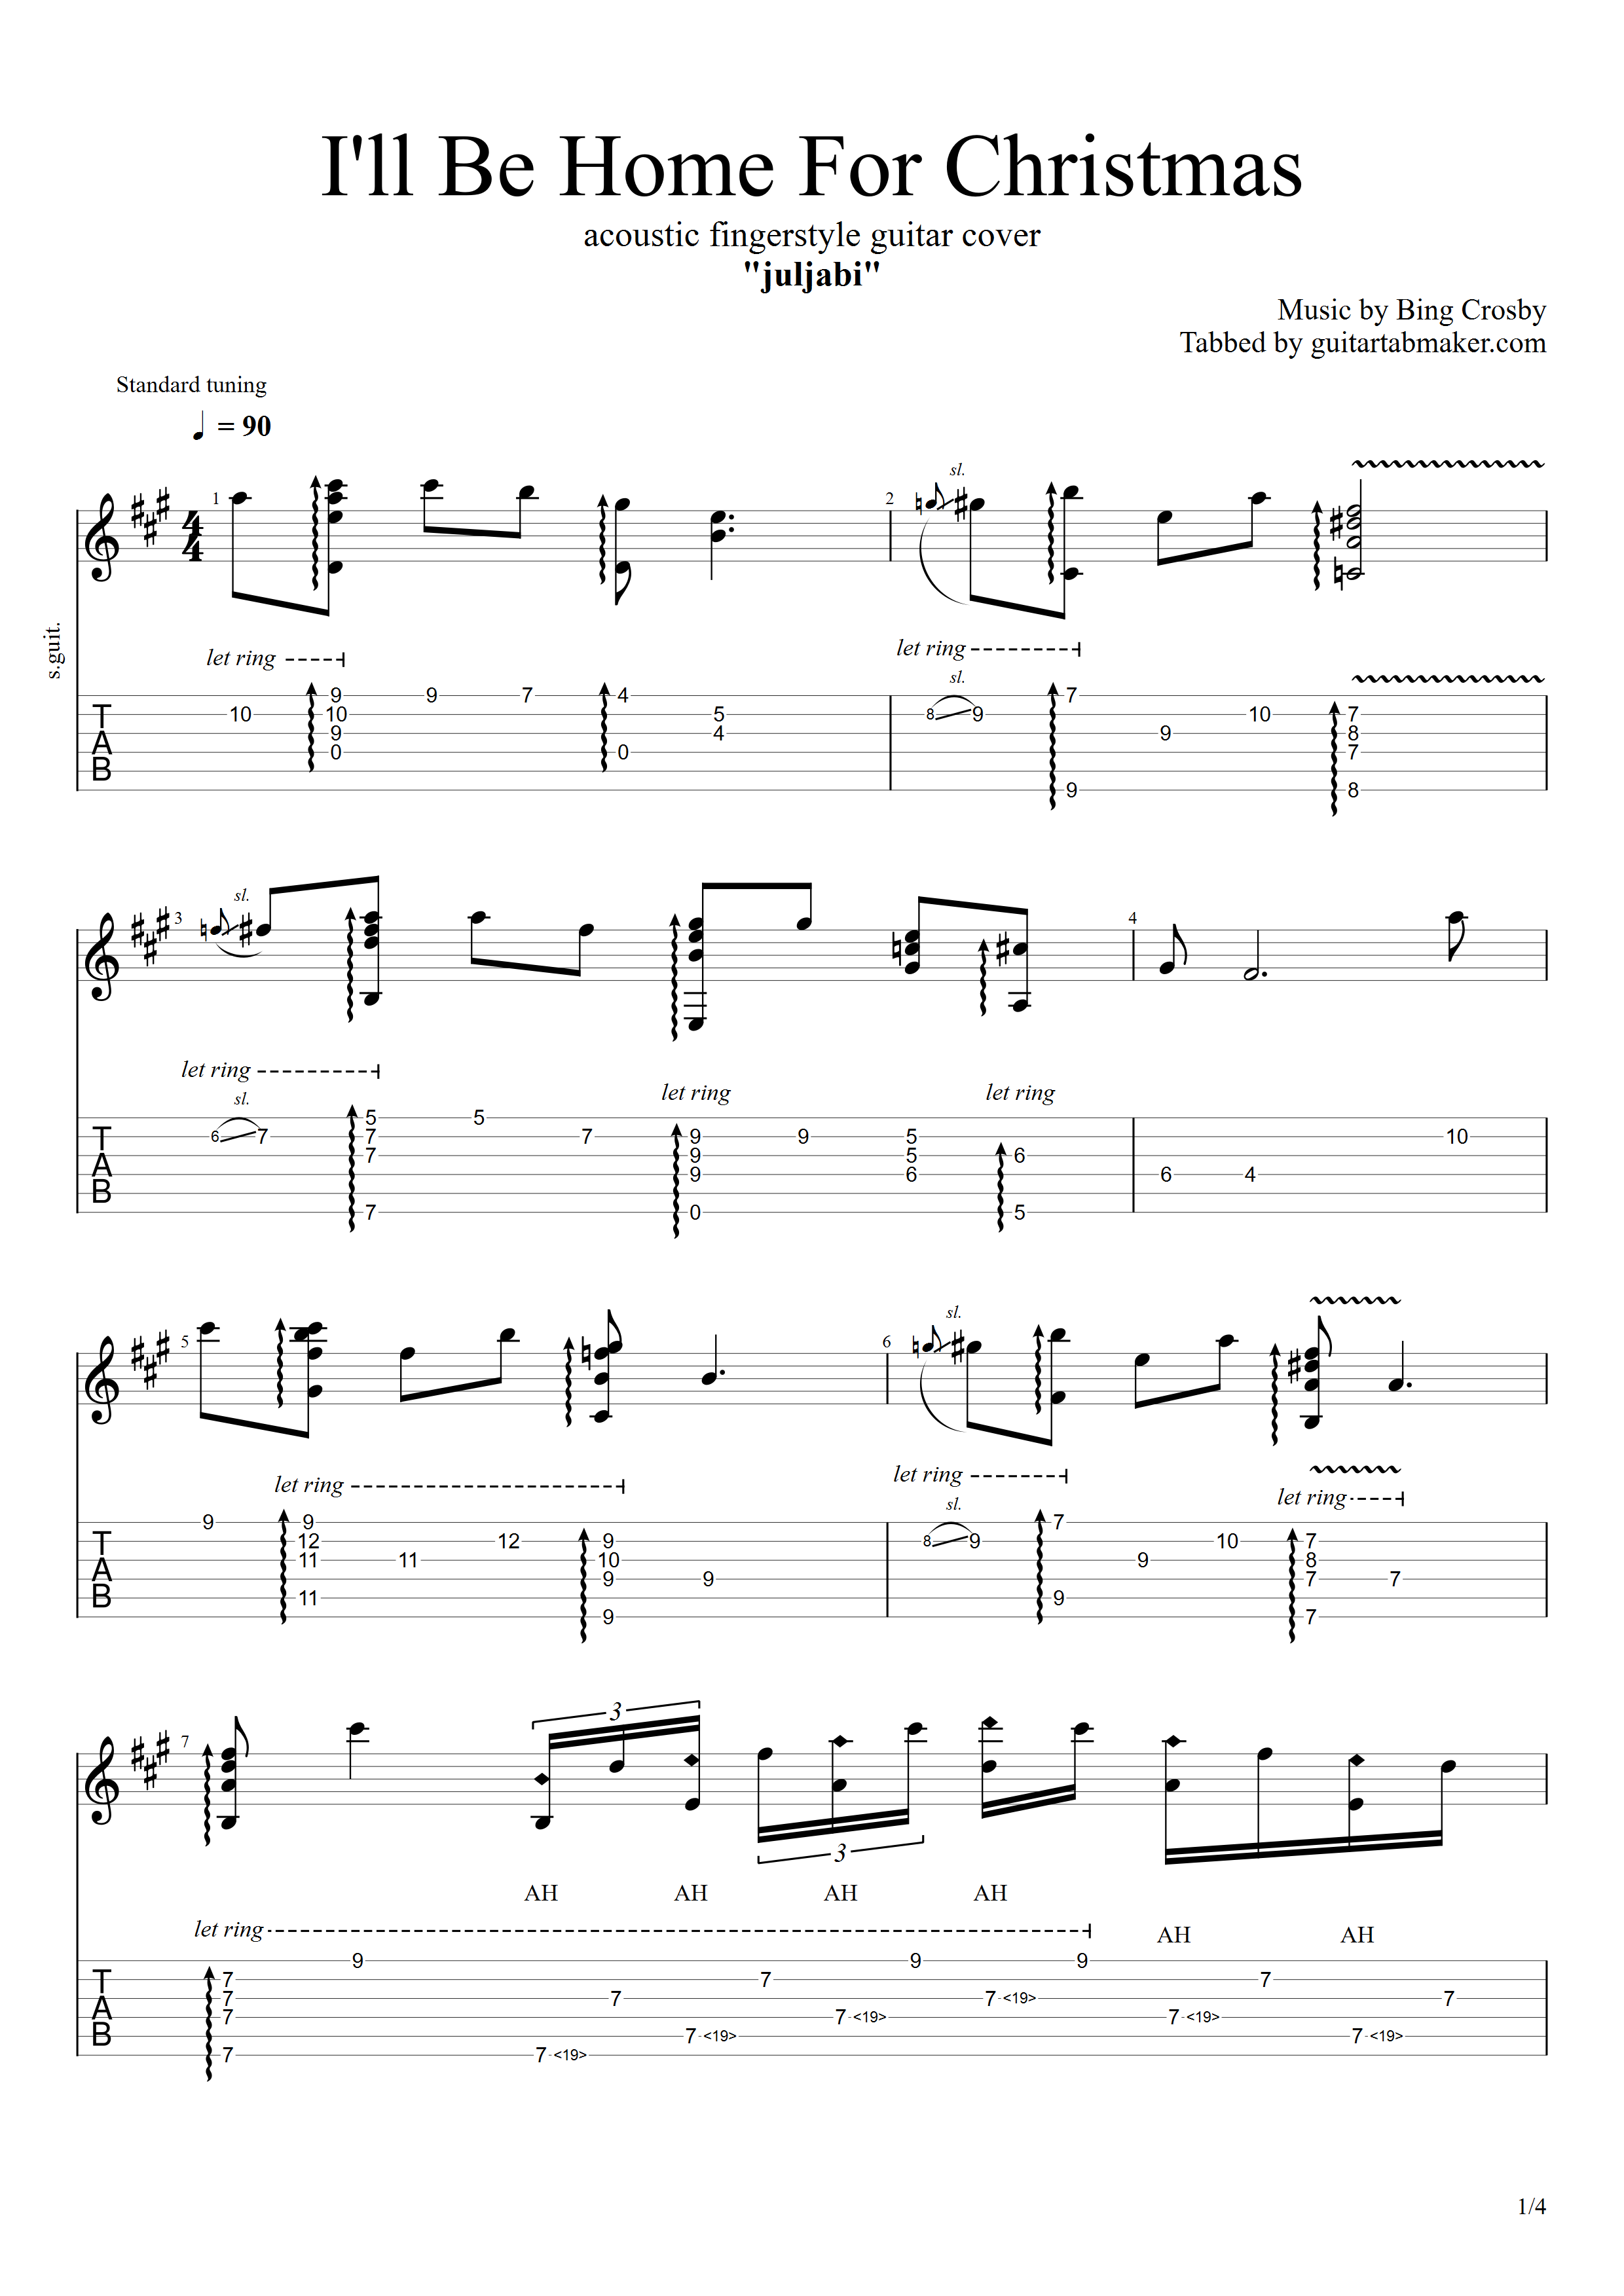 I'll Be Home For Christmas fingerstyle TAB